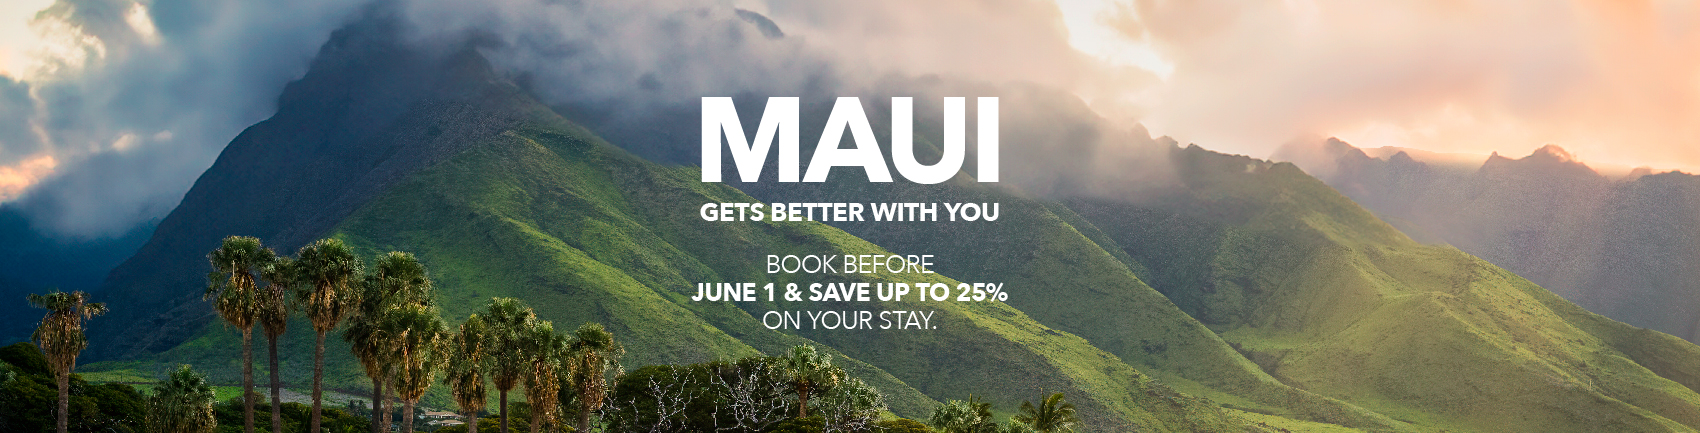 Maui Gets Better With You. Book before 5月16日th and save up to 25% on your stay.